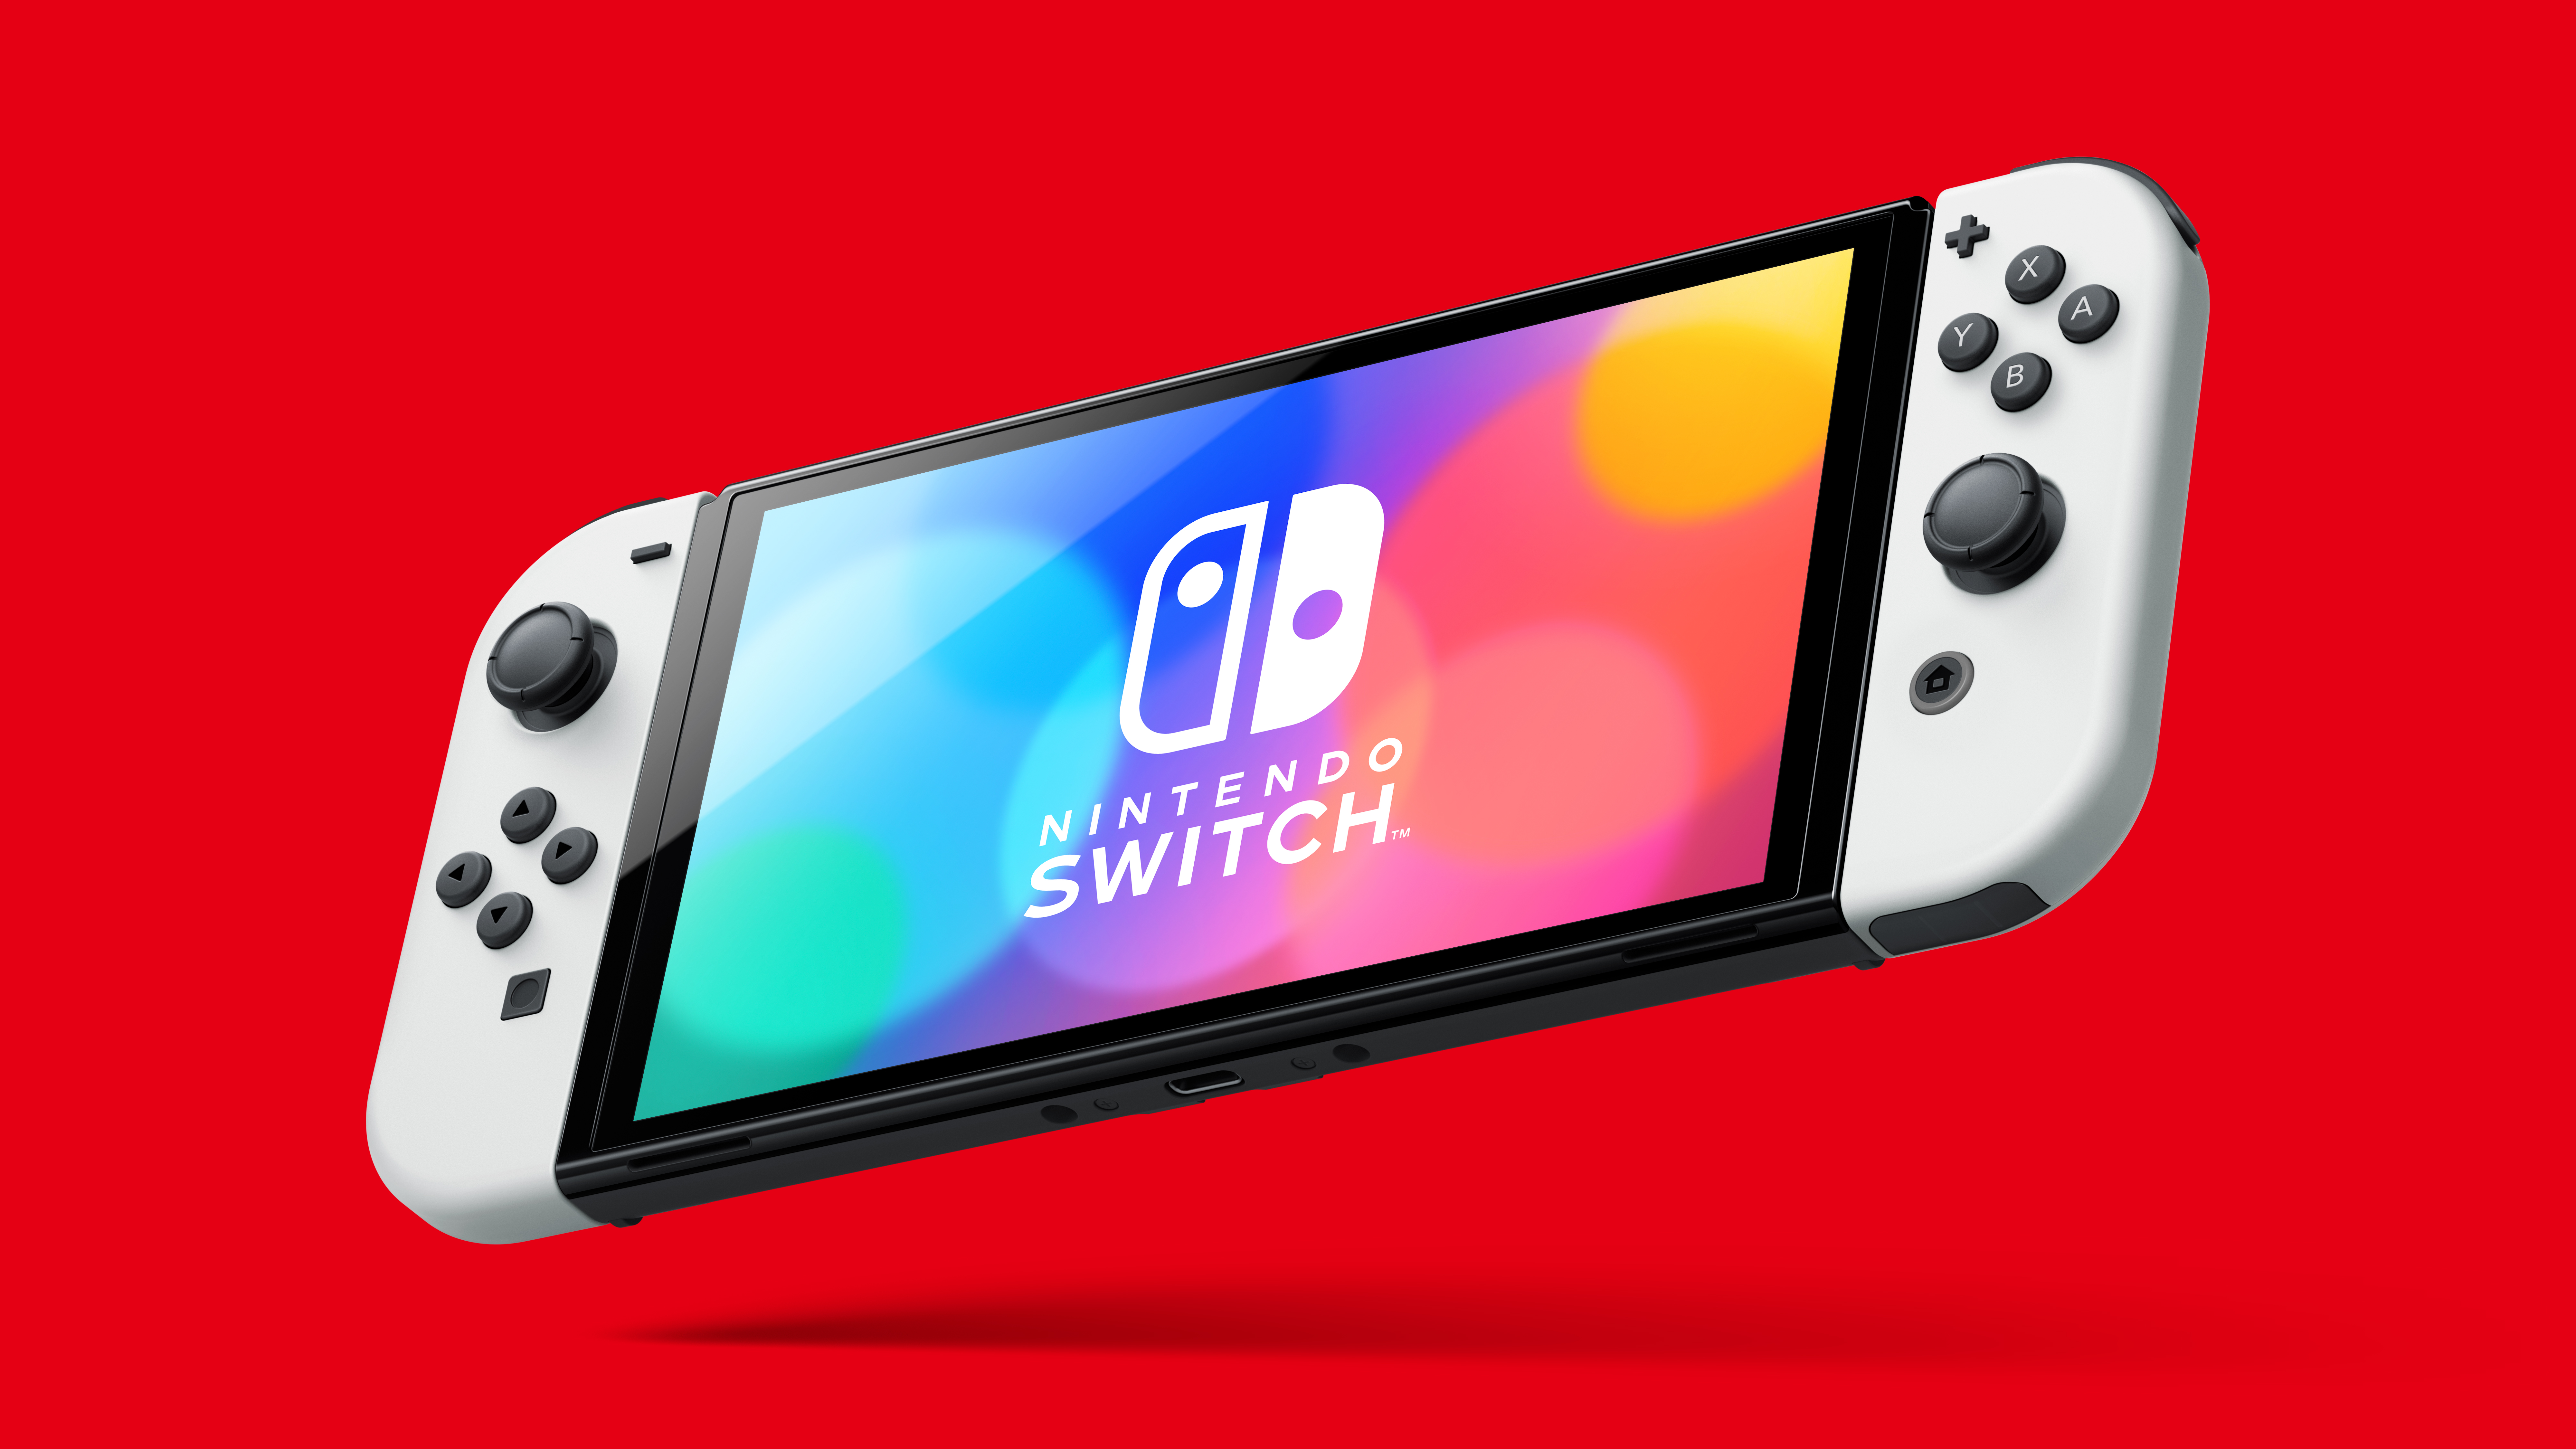 The new Nintendo Switch (OLED model) in handheld mode on a red background